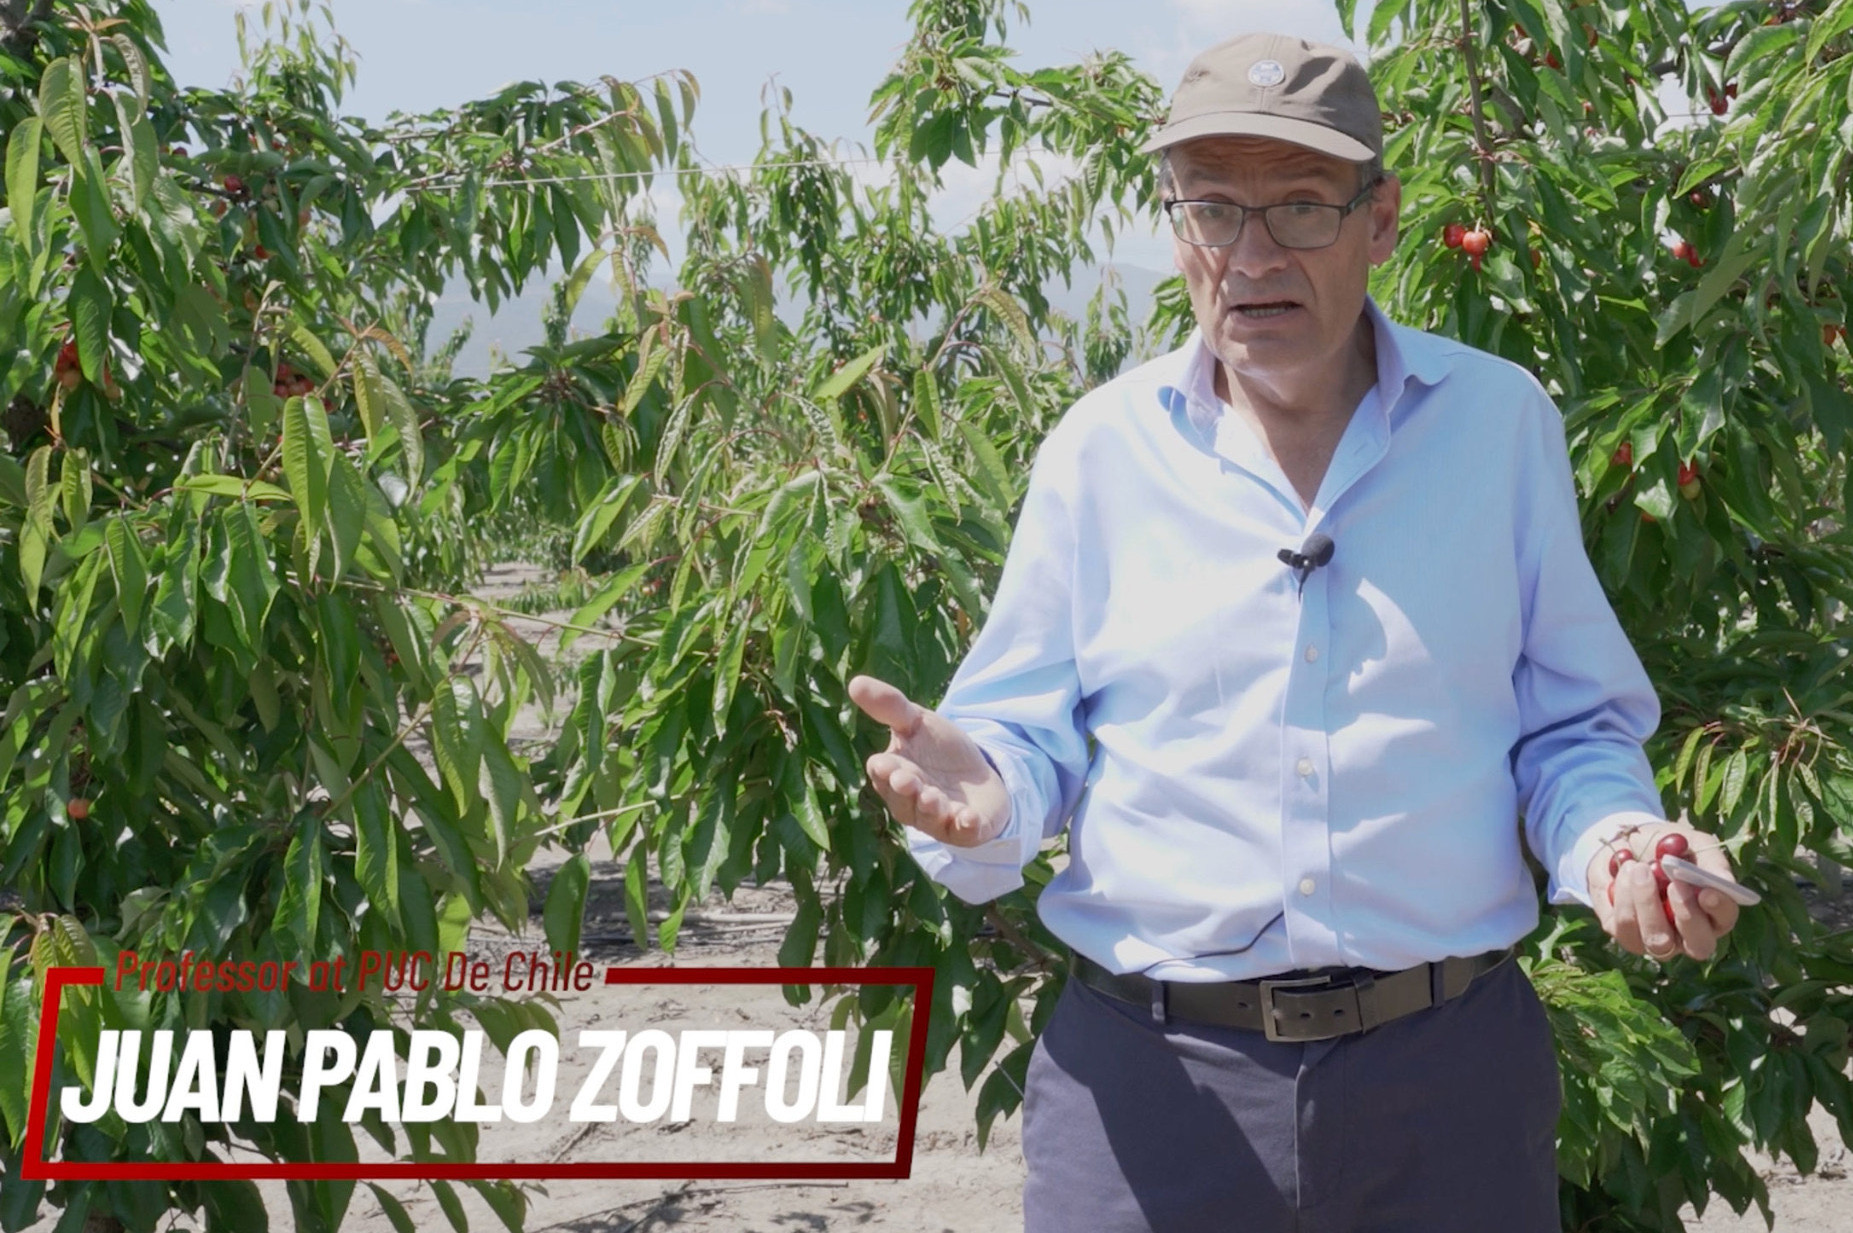 'Chilean cherries, a model to follow': the new Macfrut Academy video lecture